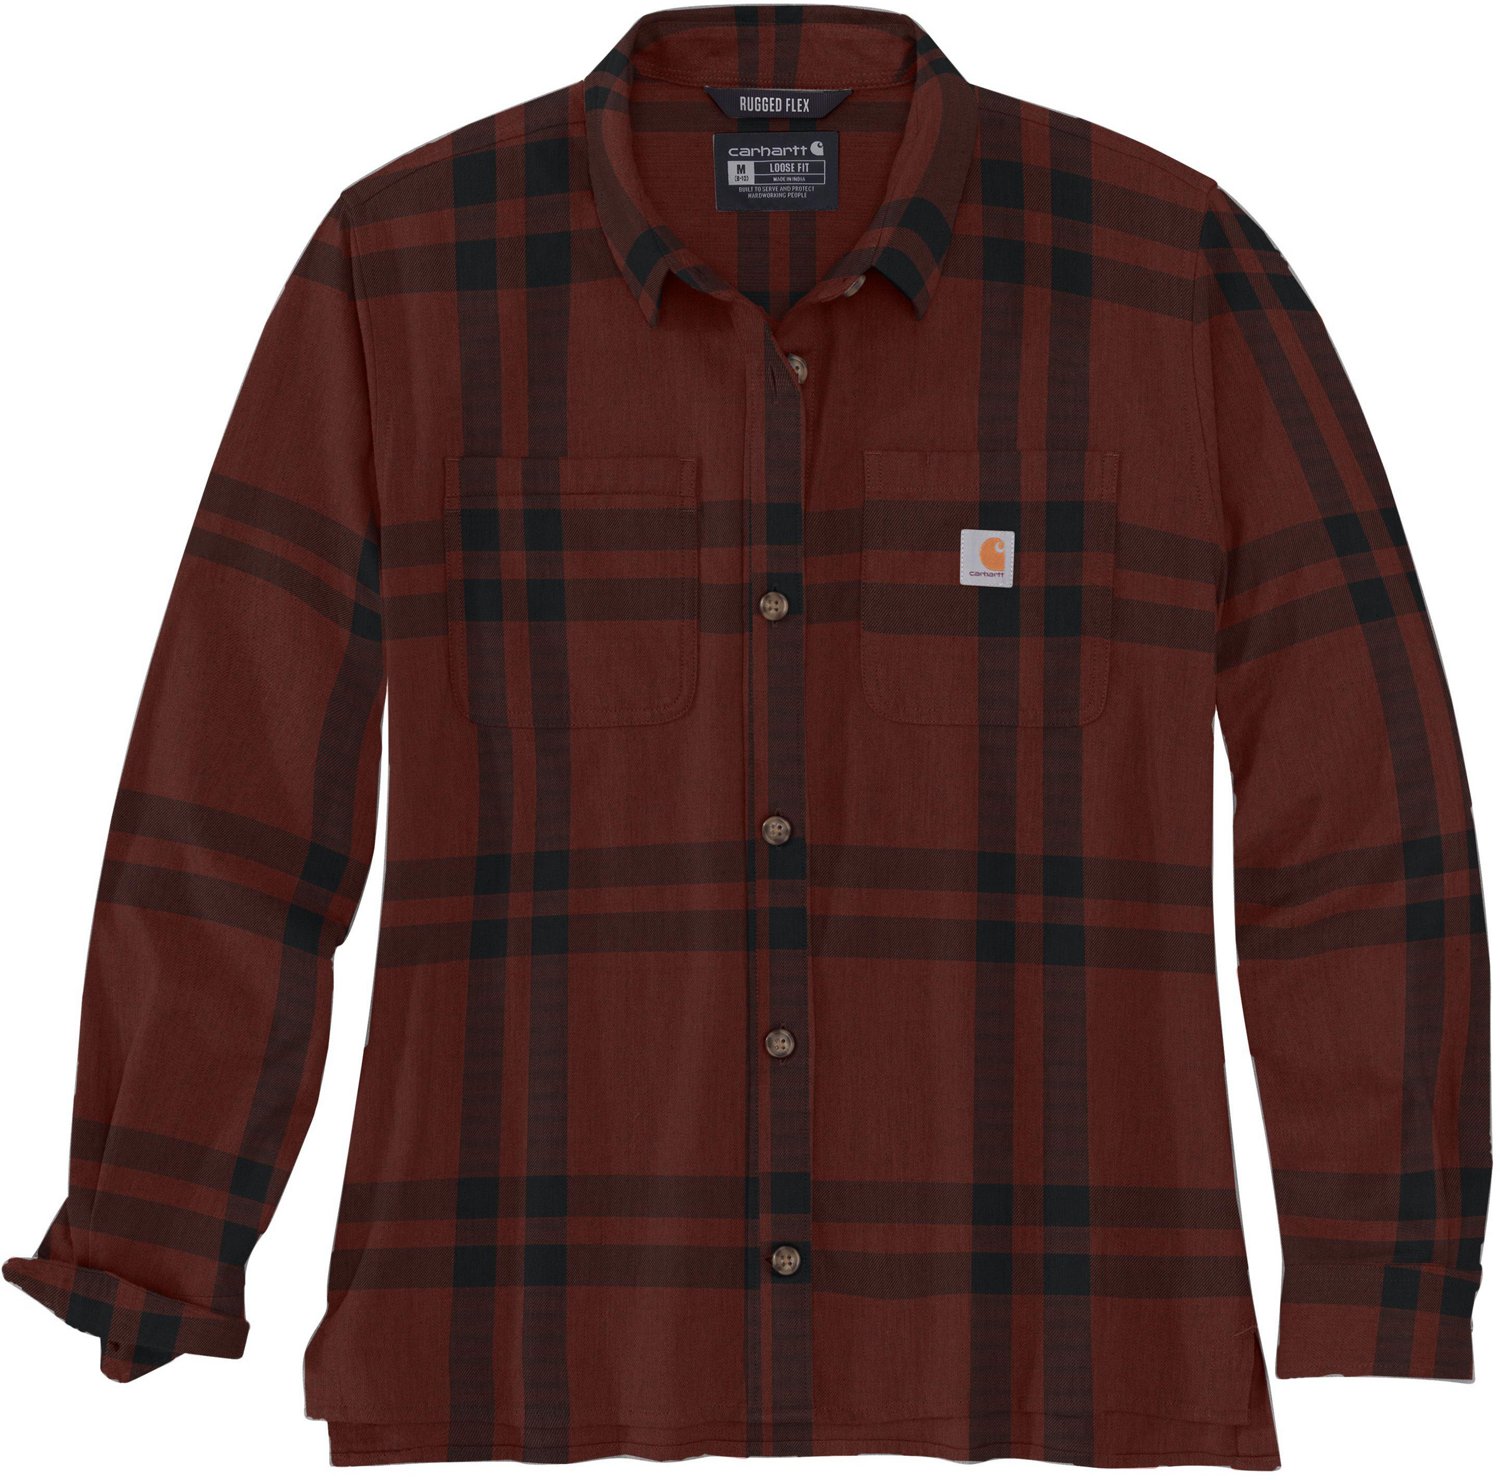 Carhartt Women's Rugged Flex Loose Fit Midweight Flannel Plus Size ...